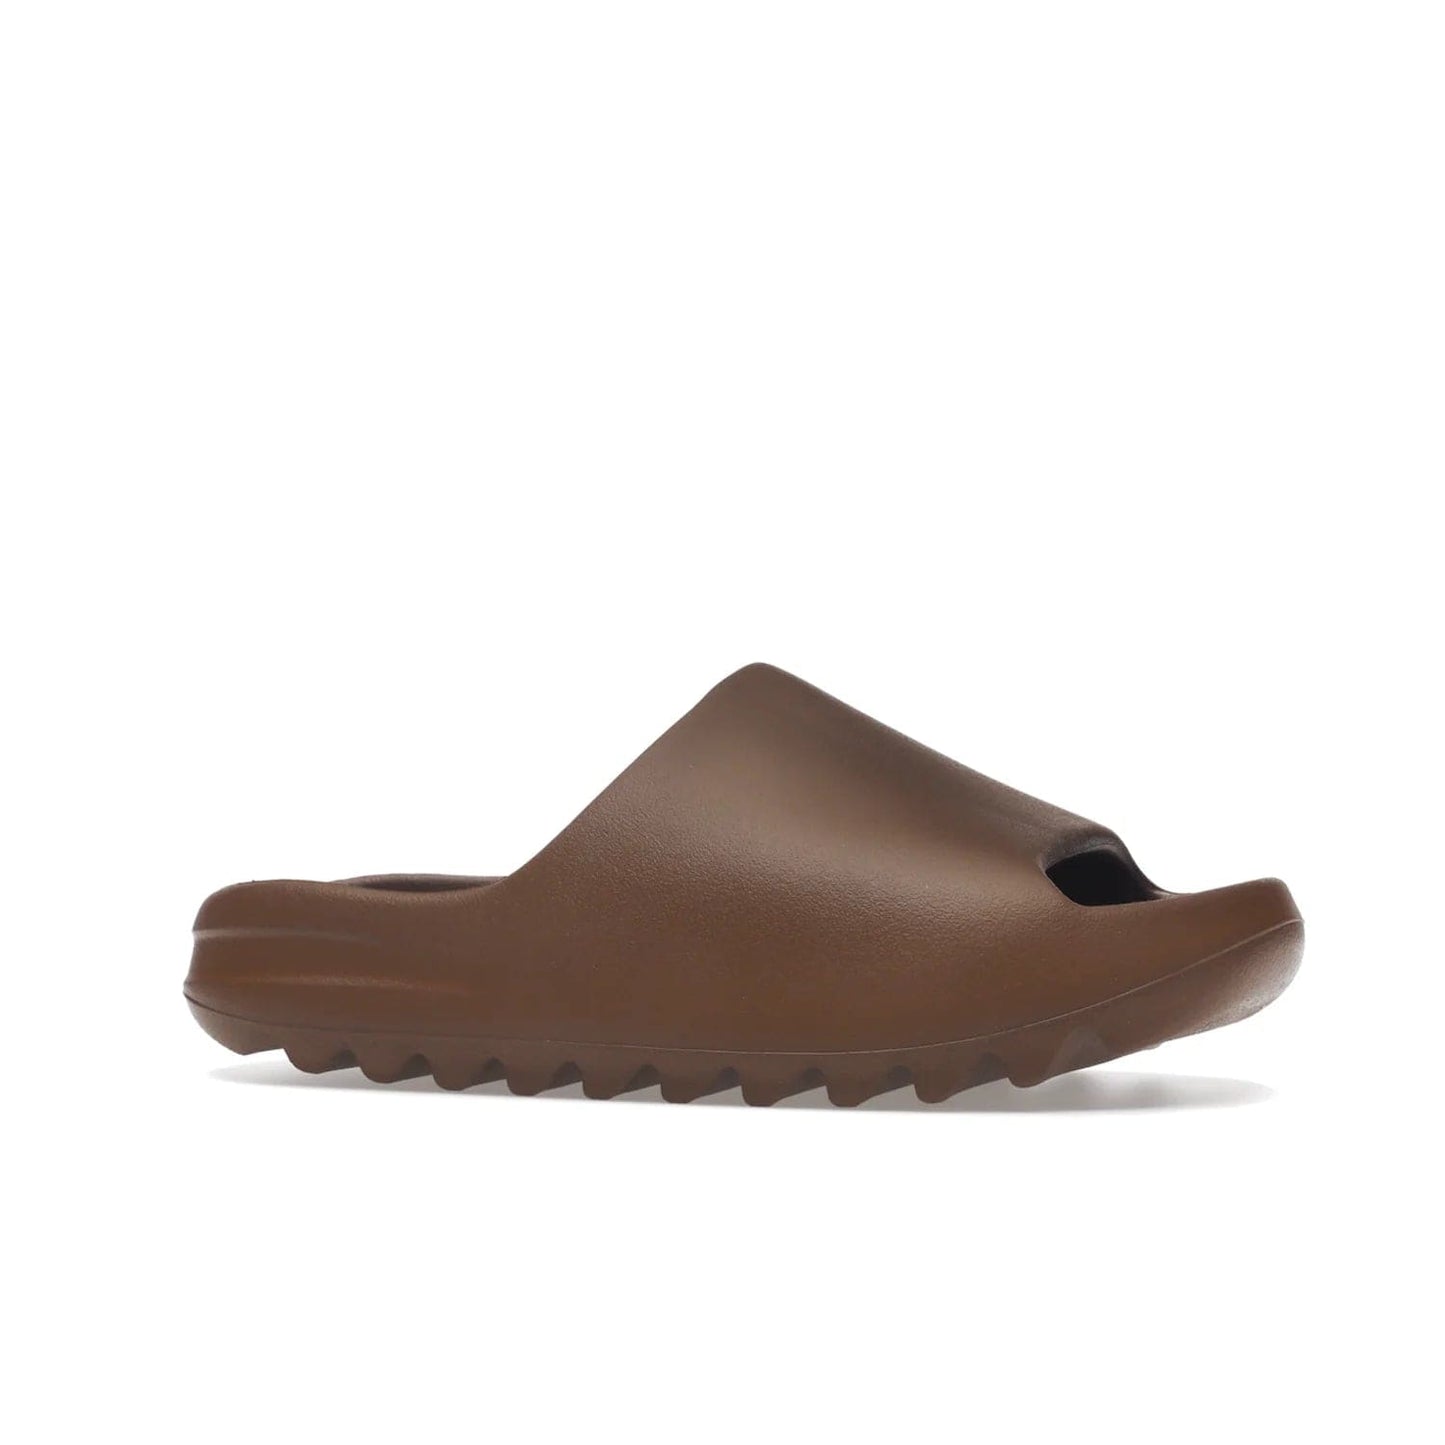 adidas Yeezy Slide Flax - Image 3 - Only at www.BallersClubKickz.com - Score the perfect casual look with the adidas Yeezy Slide Flax. Made with lightweight injected EVA plus horizontal grooves underfoot for traction. Release on August 22, 2022. $70.